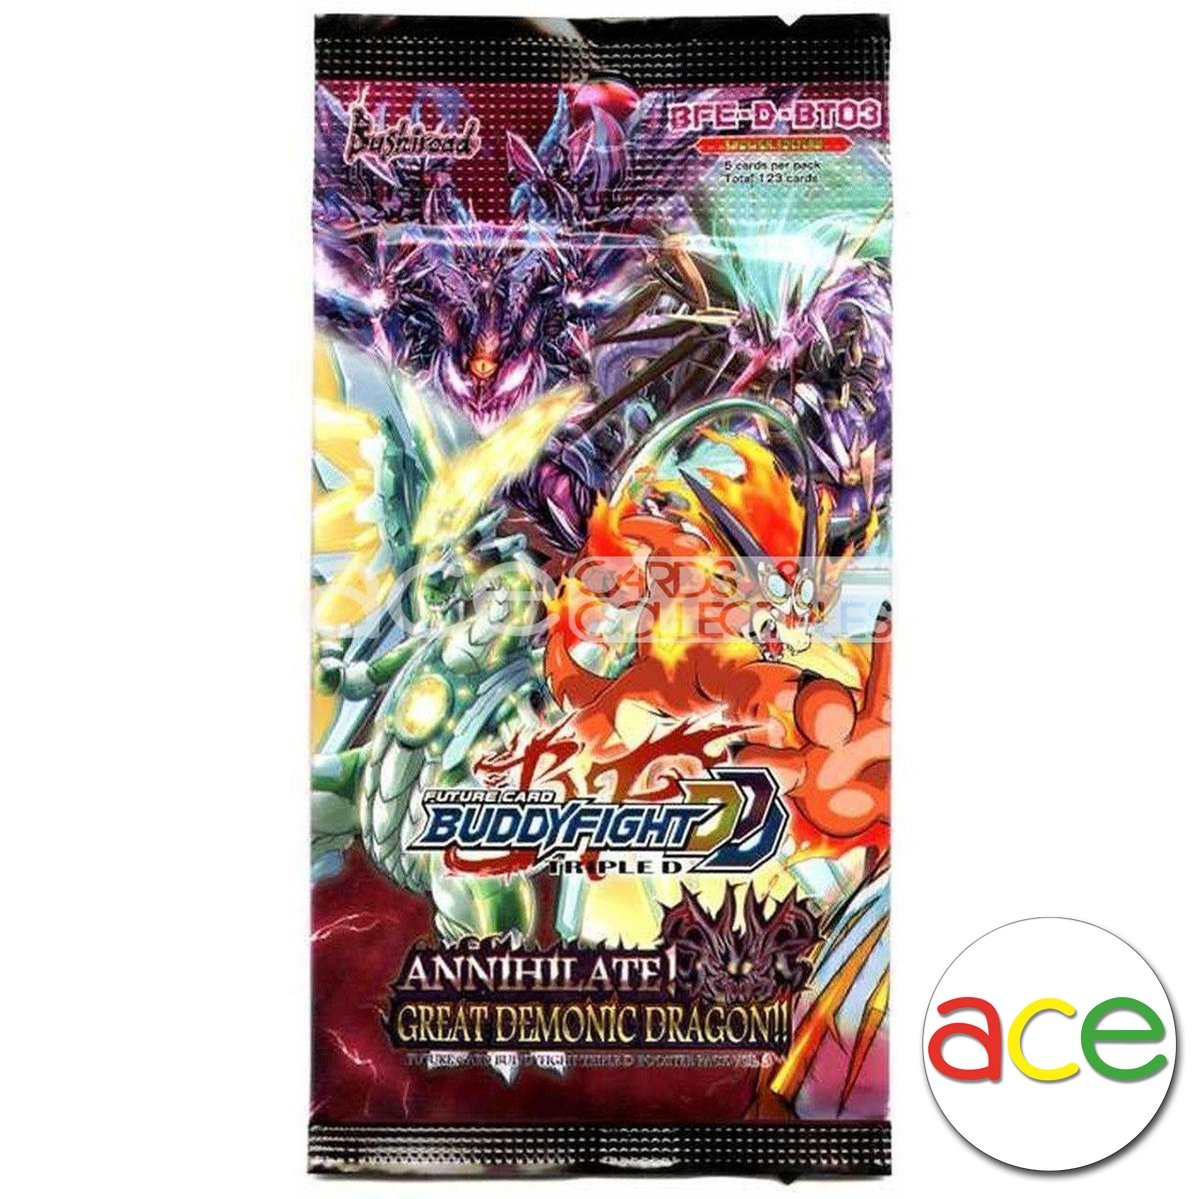 Future Card Buddyfight D Annihilate! Great Demonic Dragon ( Booster Pack ) [BFE-D-BT03] (English)-Bushiroad-Ace Cards & Collectibles